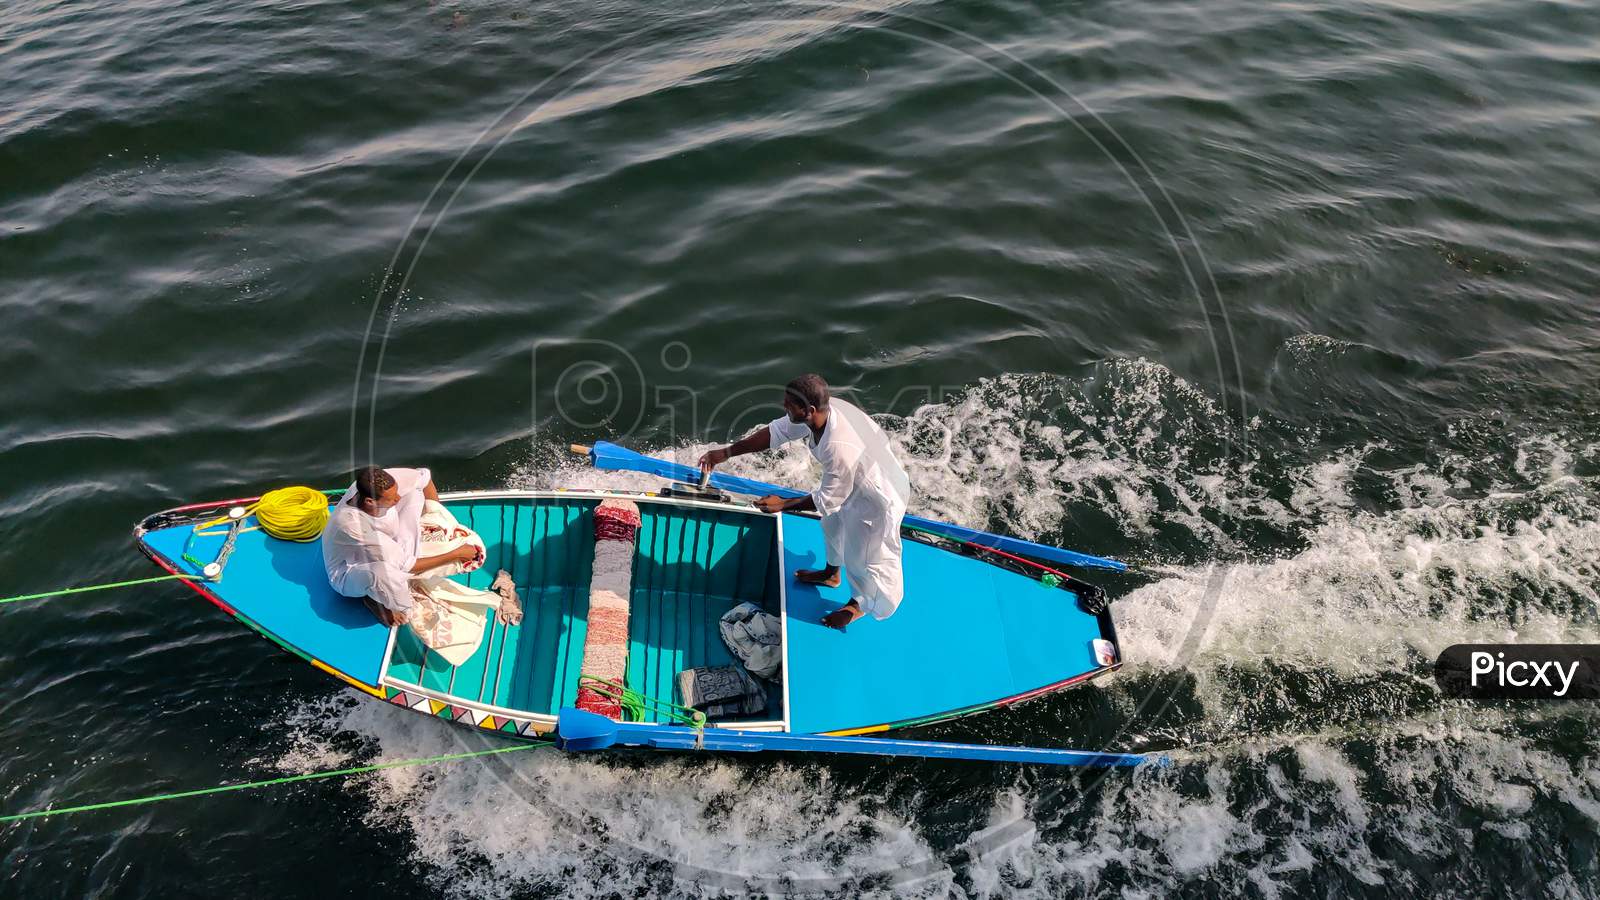 Egyptian Boys Selling Handmade Cloth While Sailing On Boat.